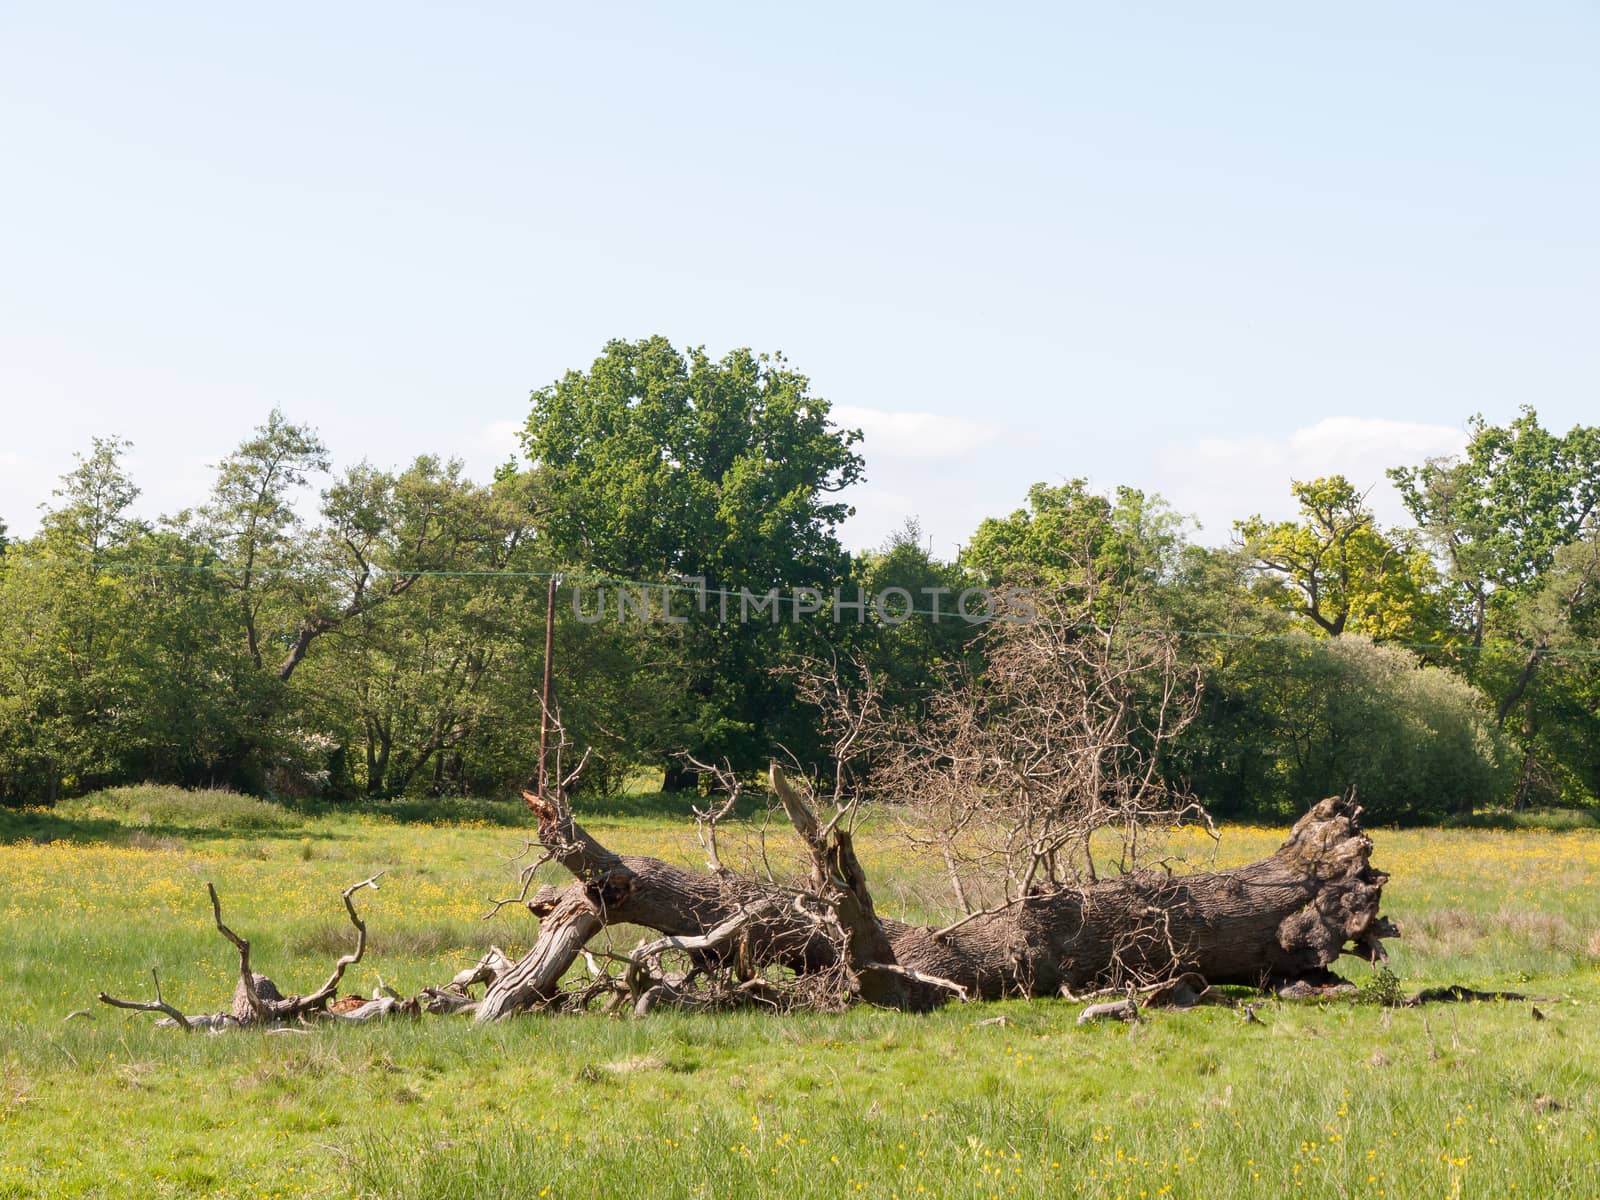 fallen tree in field spring day blue sky green grass trees close by callumrc